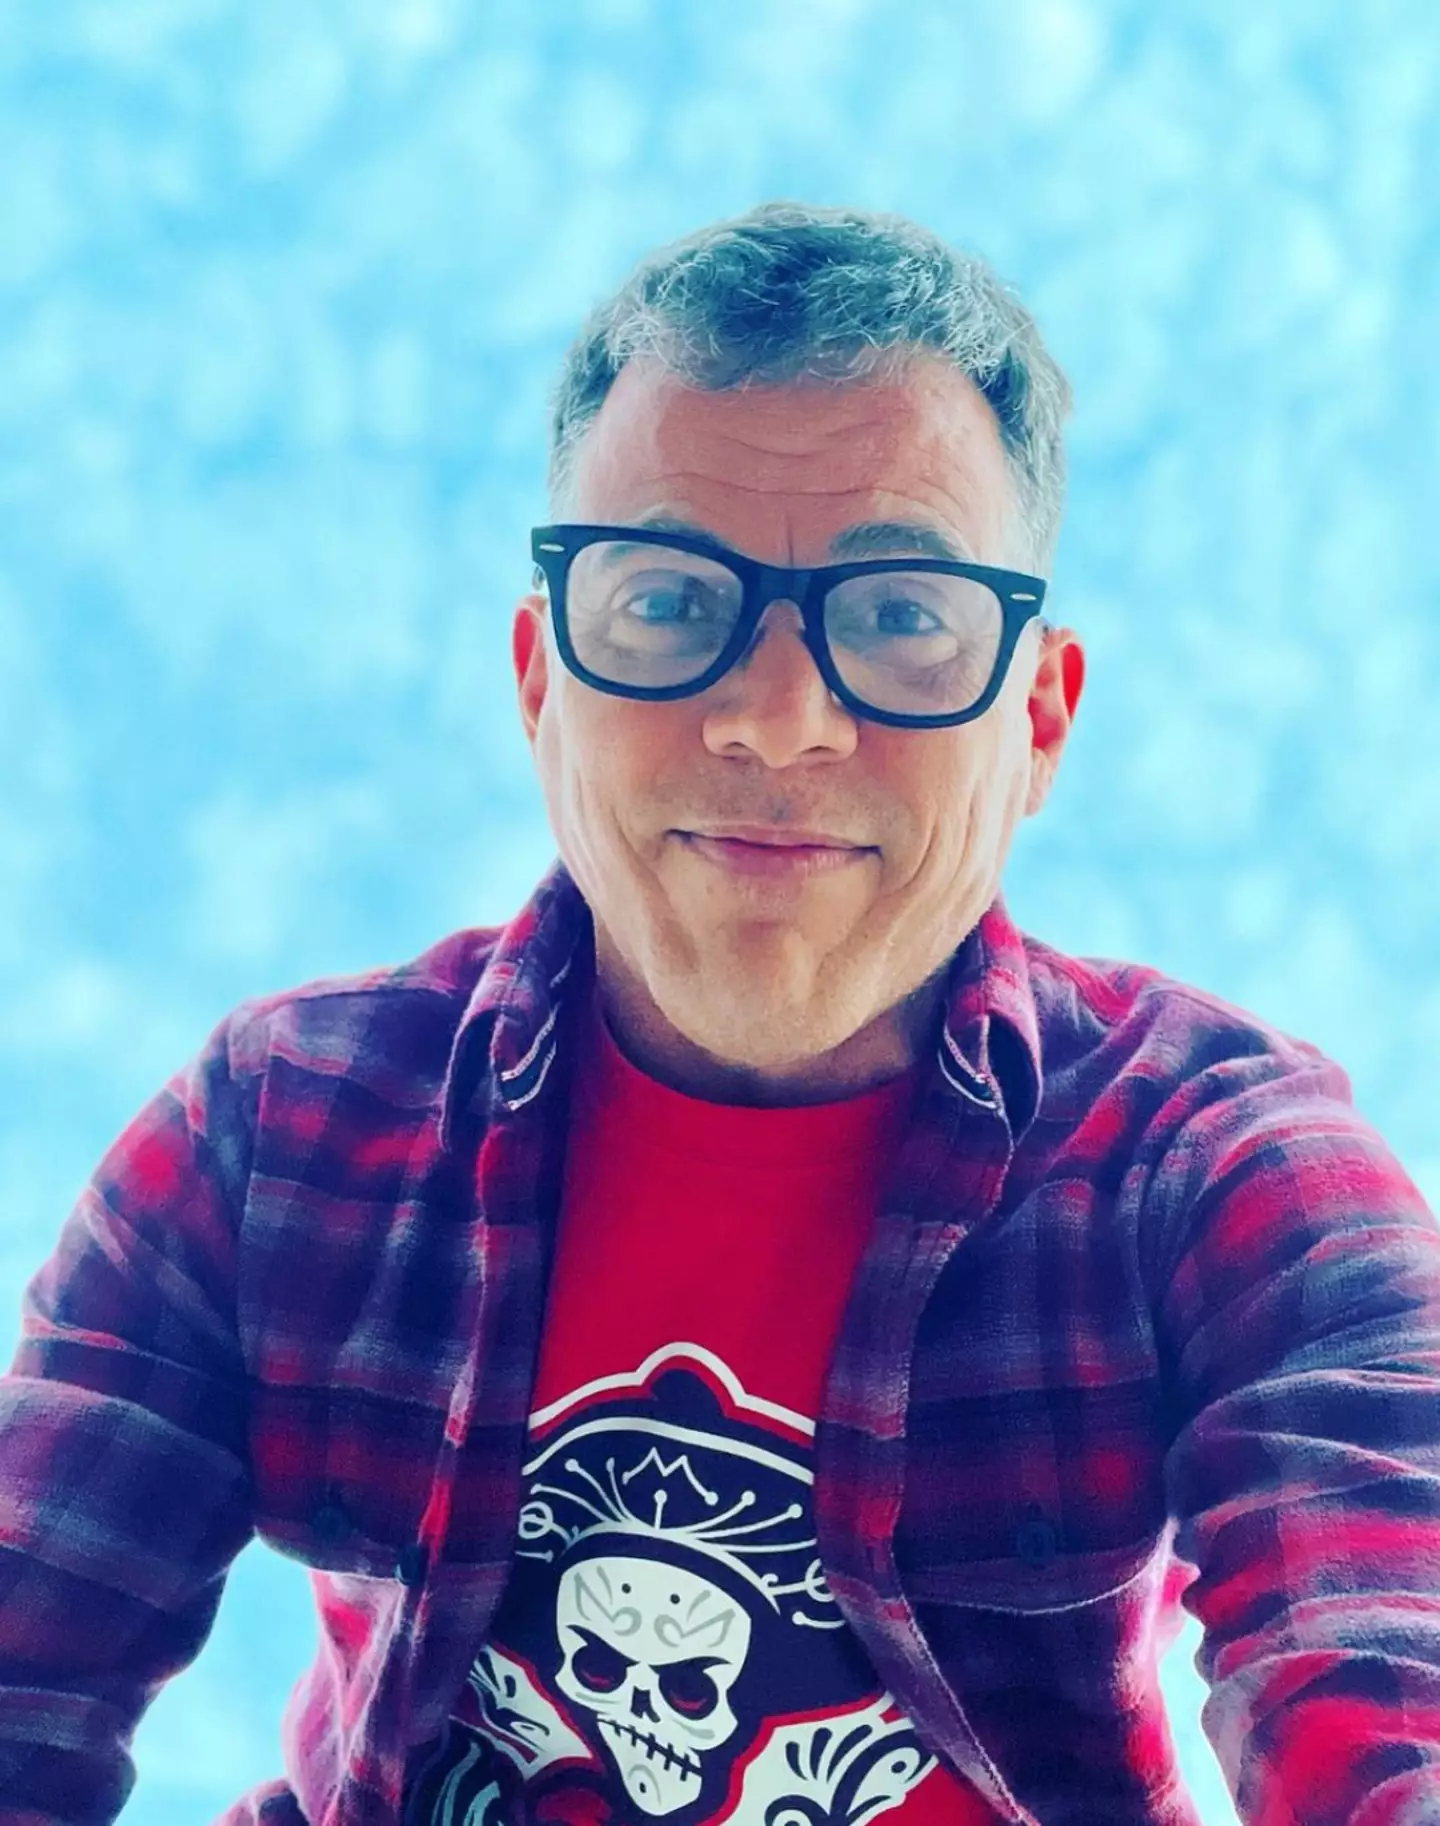 Steve-O has spoken about the impact his stunts have had on his body.